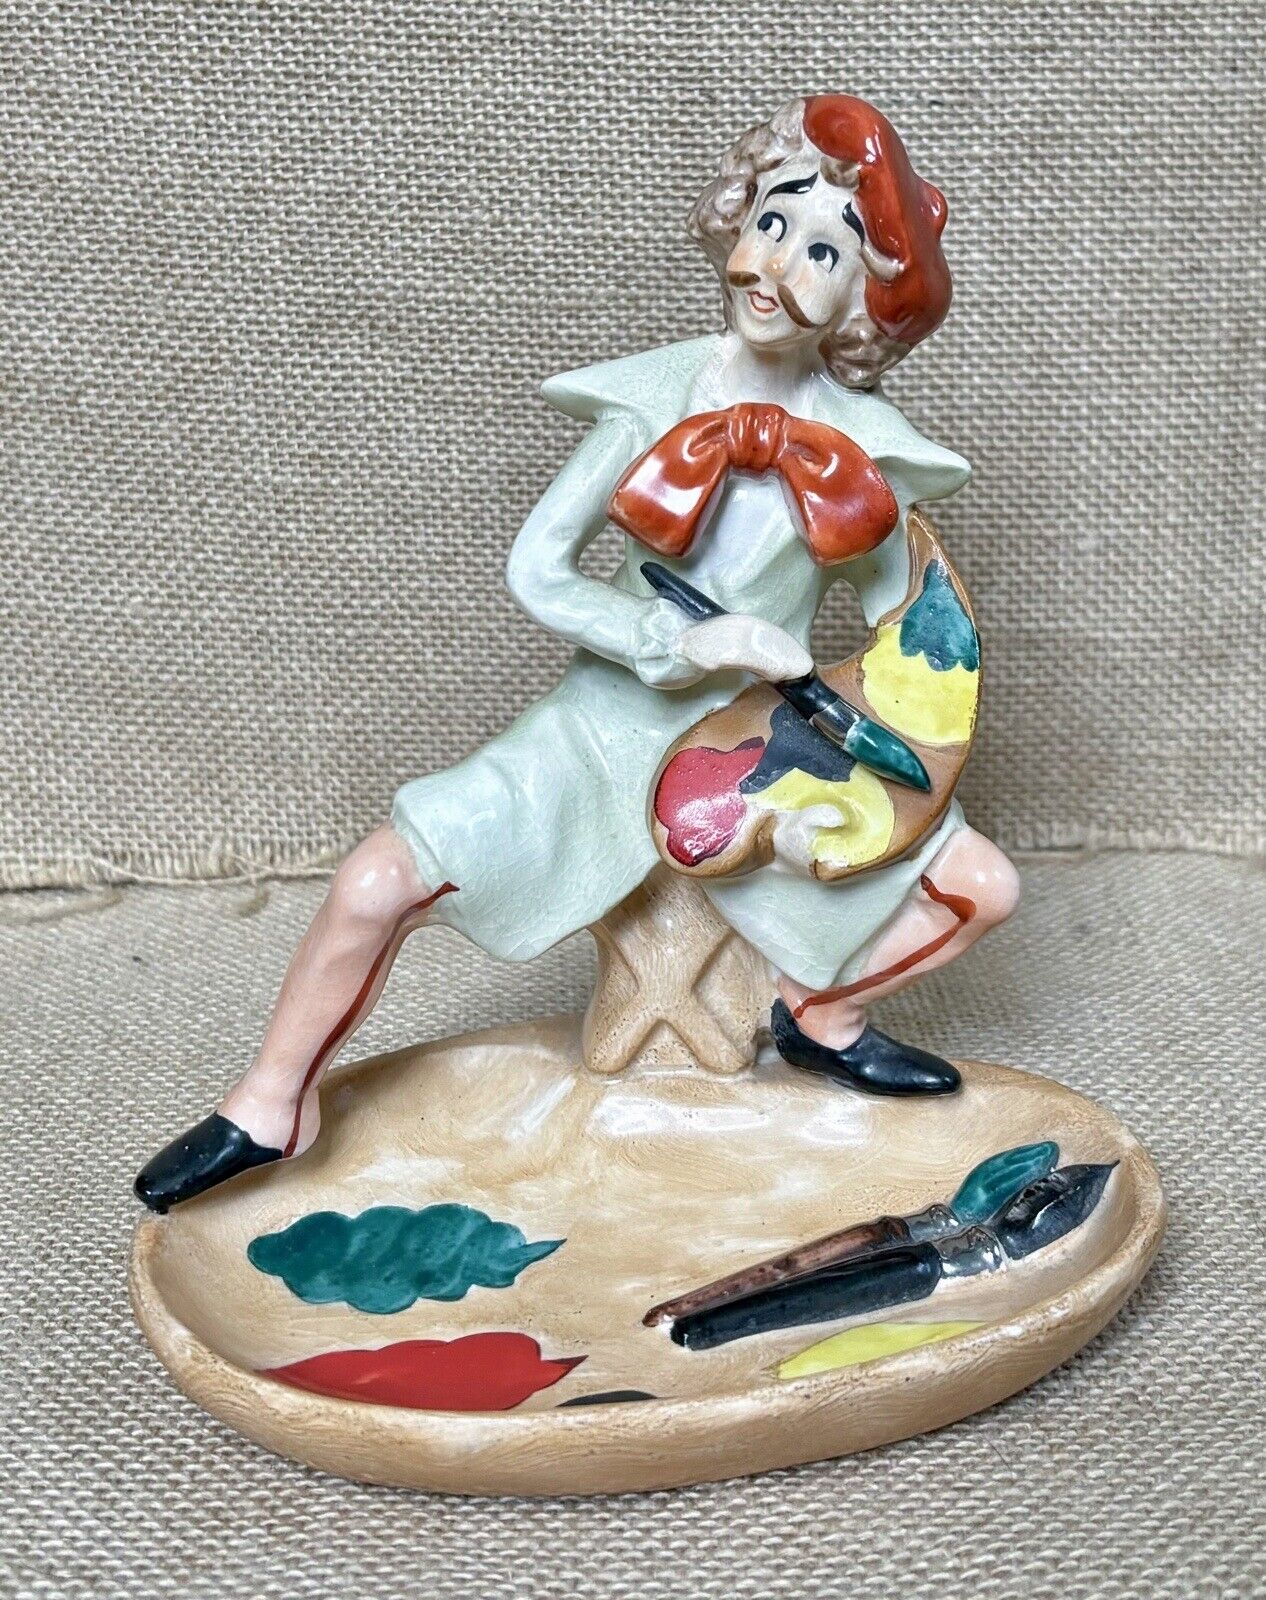 Vintage French Painter Artist Palette Trinket Dish Fun Novelty Eclectic AS IS